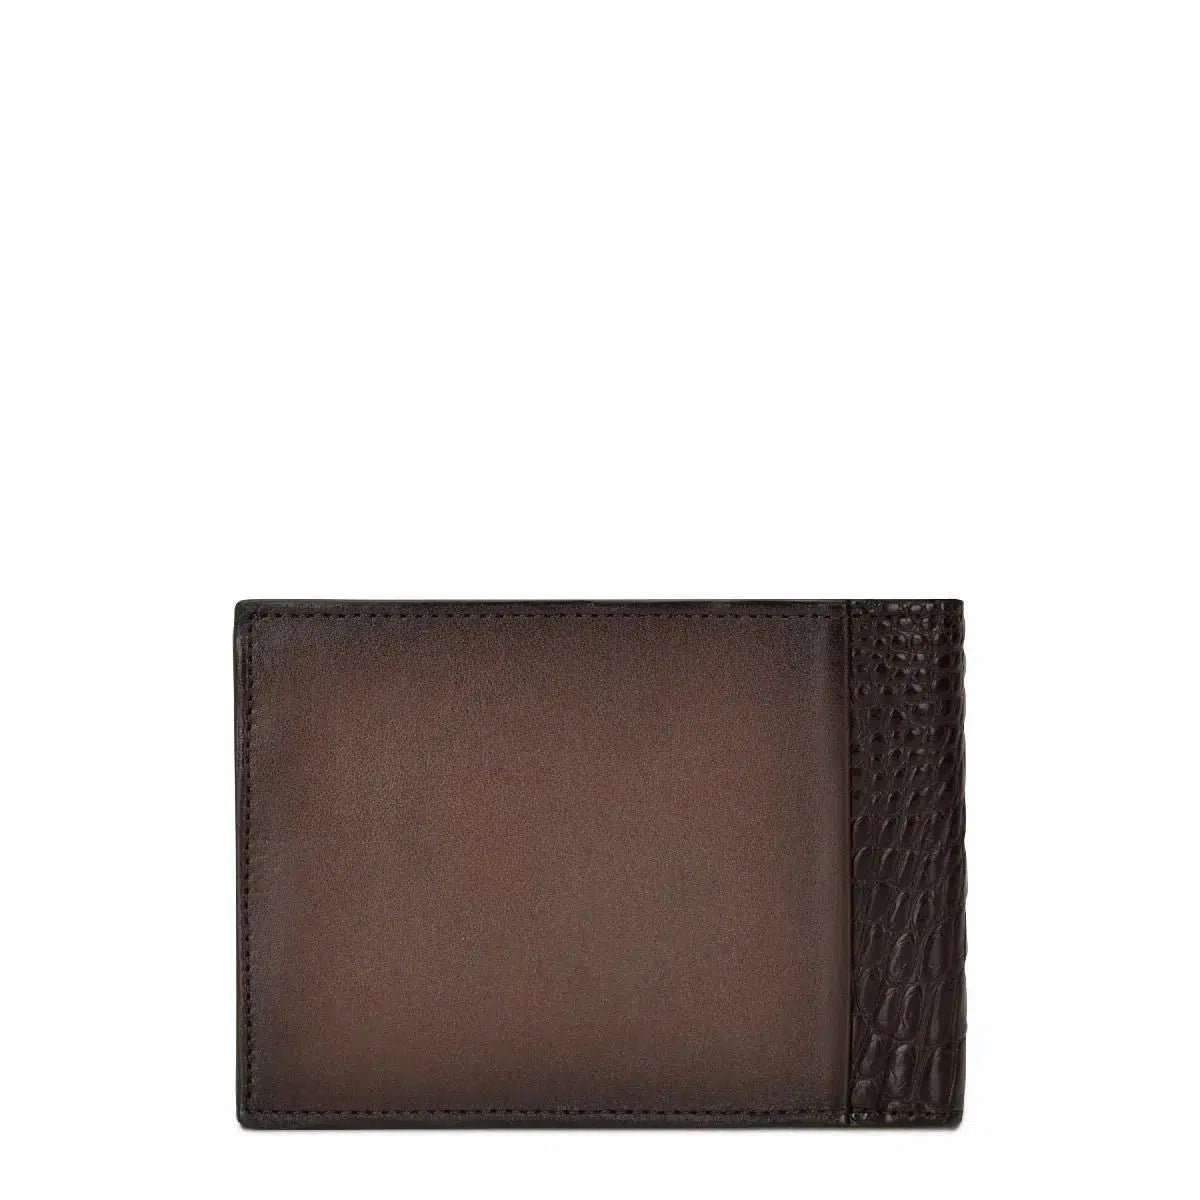 BC003NL - Cuadra brown classic niloticus exotic bifold wallet for men.-Kuet.us